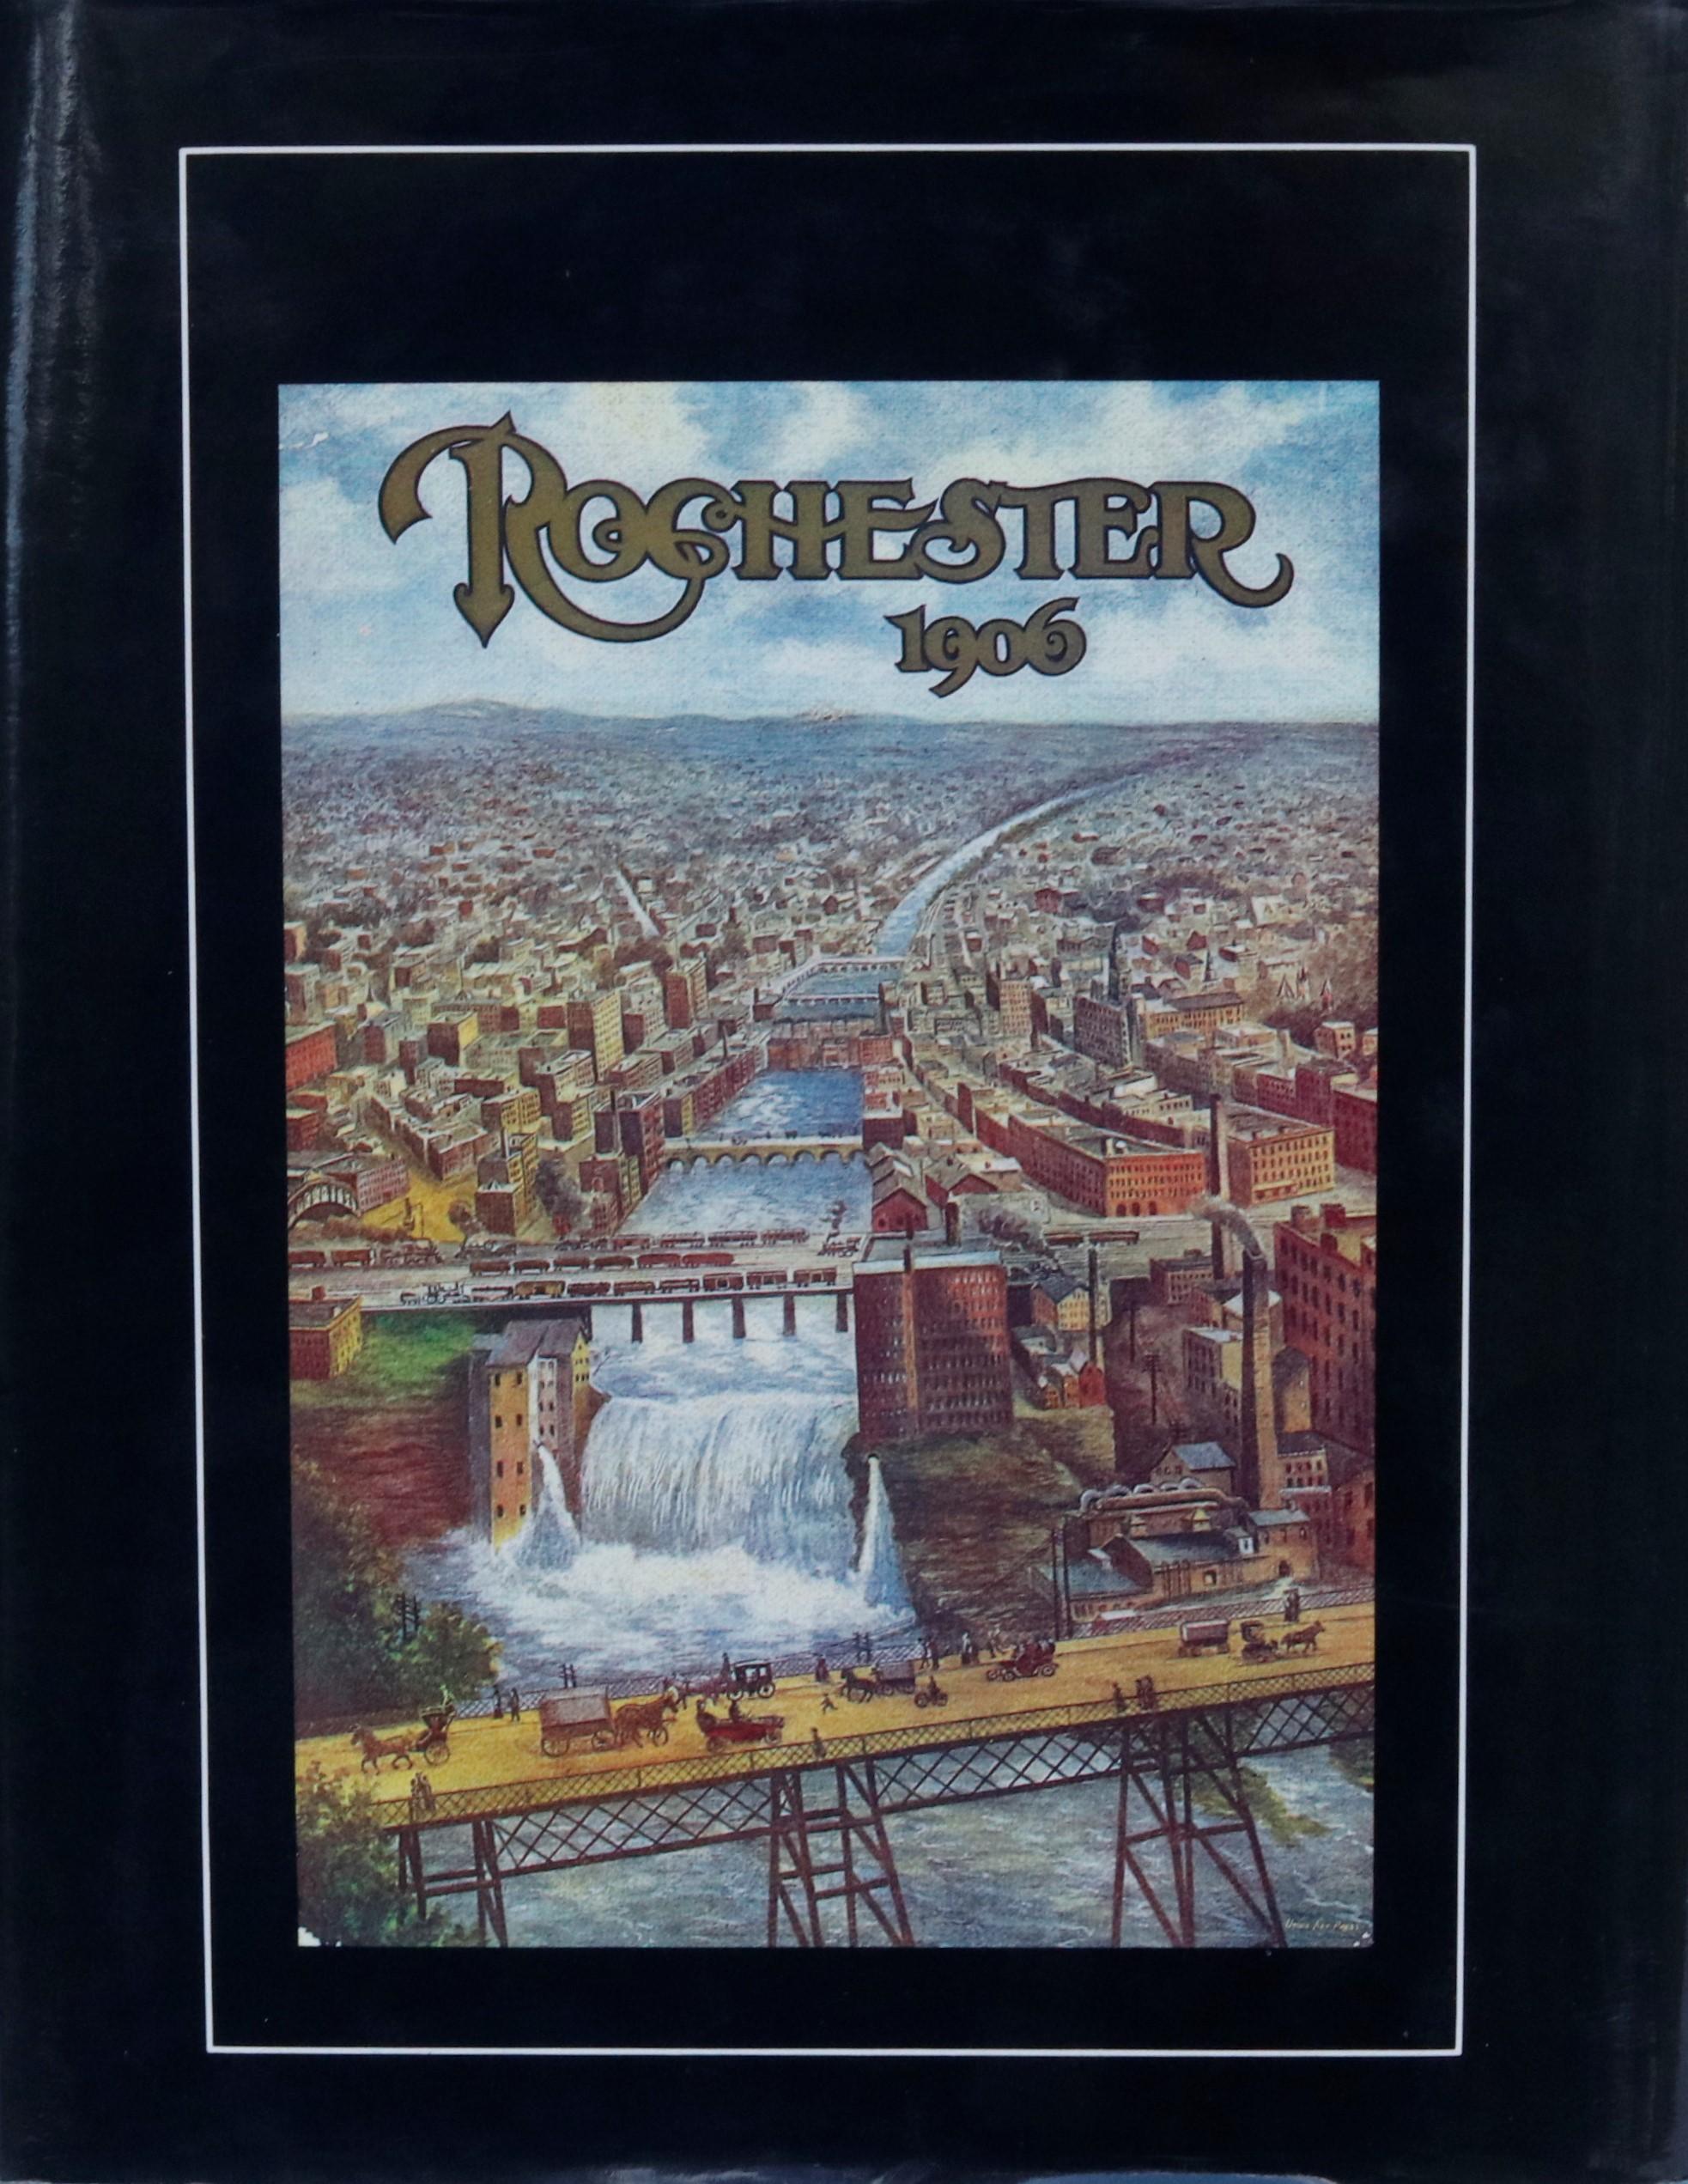 Rochester, A Pictorial History by Ruth Rosenberg-Naparsteck. Published by The Donning Company of Norfolk/Virginia Beach in 1994. Hardcover with dust jacket, 192 pages.